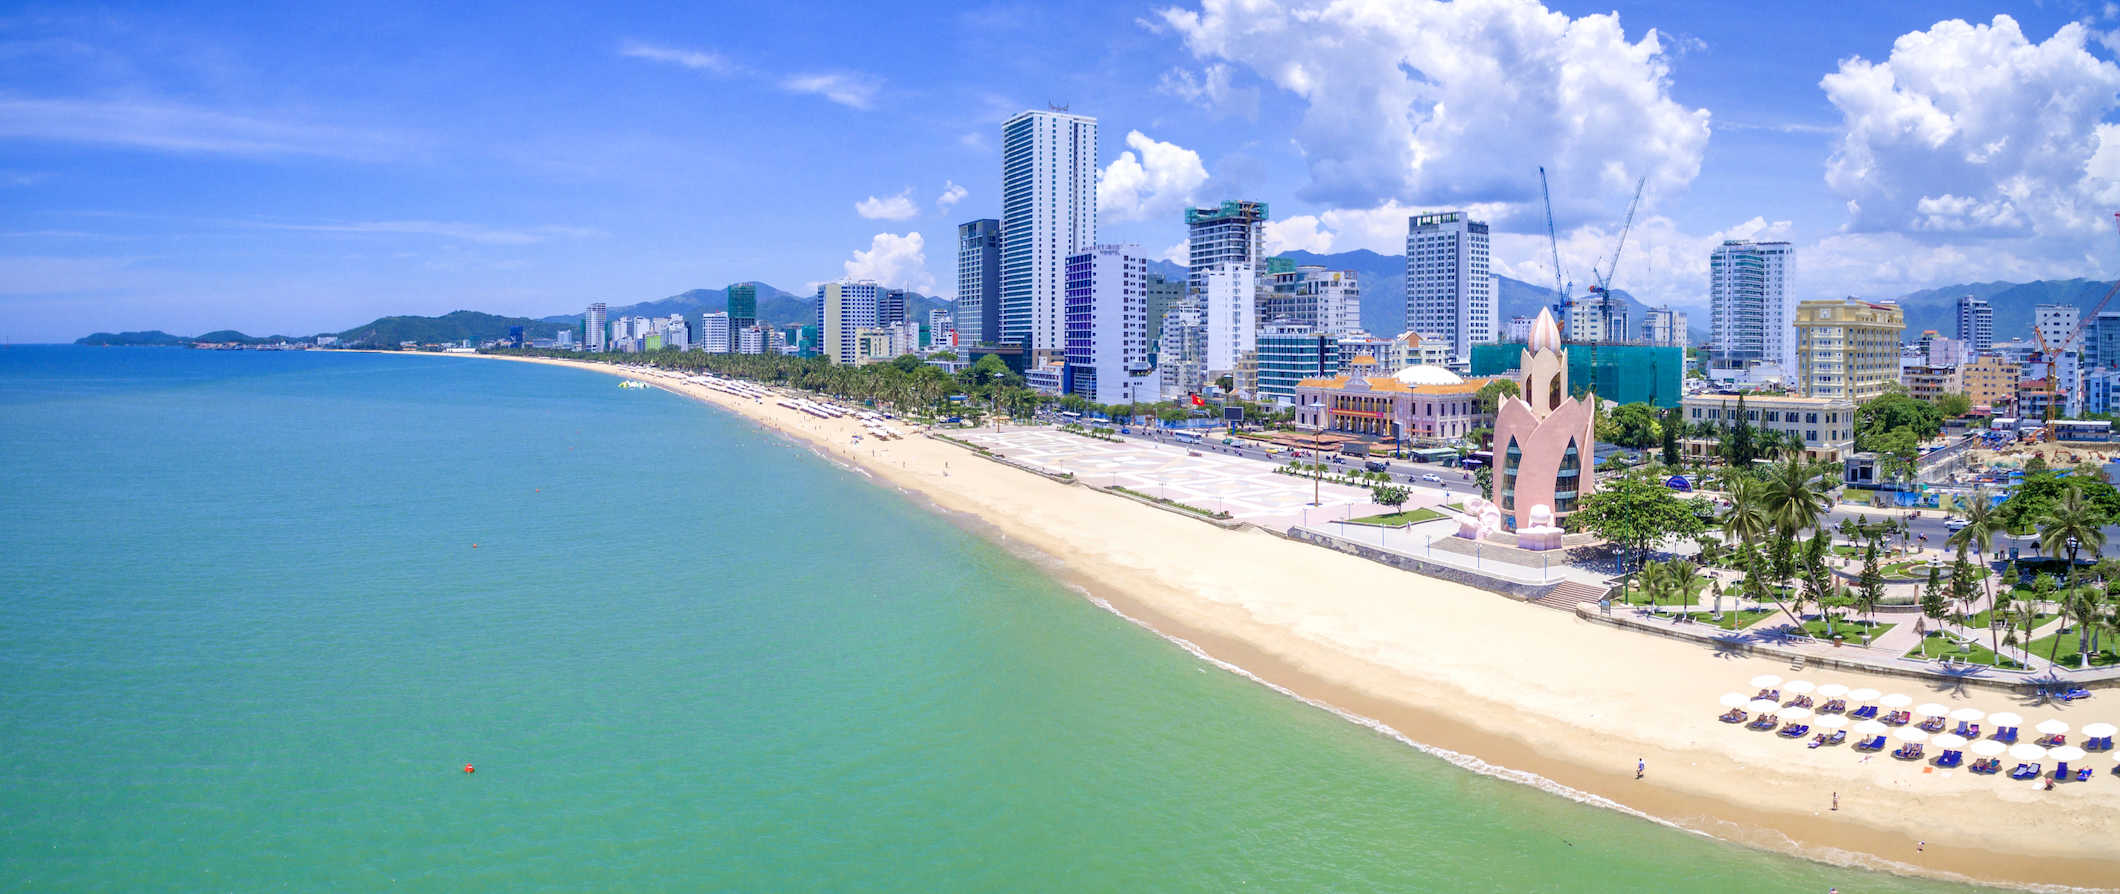 The beach scene along the coats of Nha Trang, Vietnam with the city skyline towering along the coastline